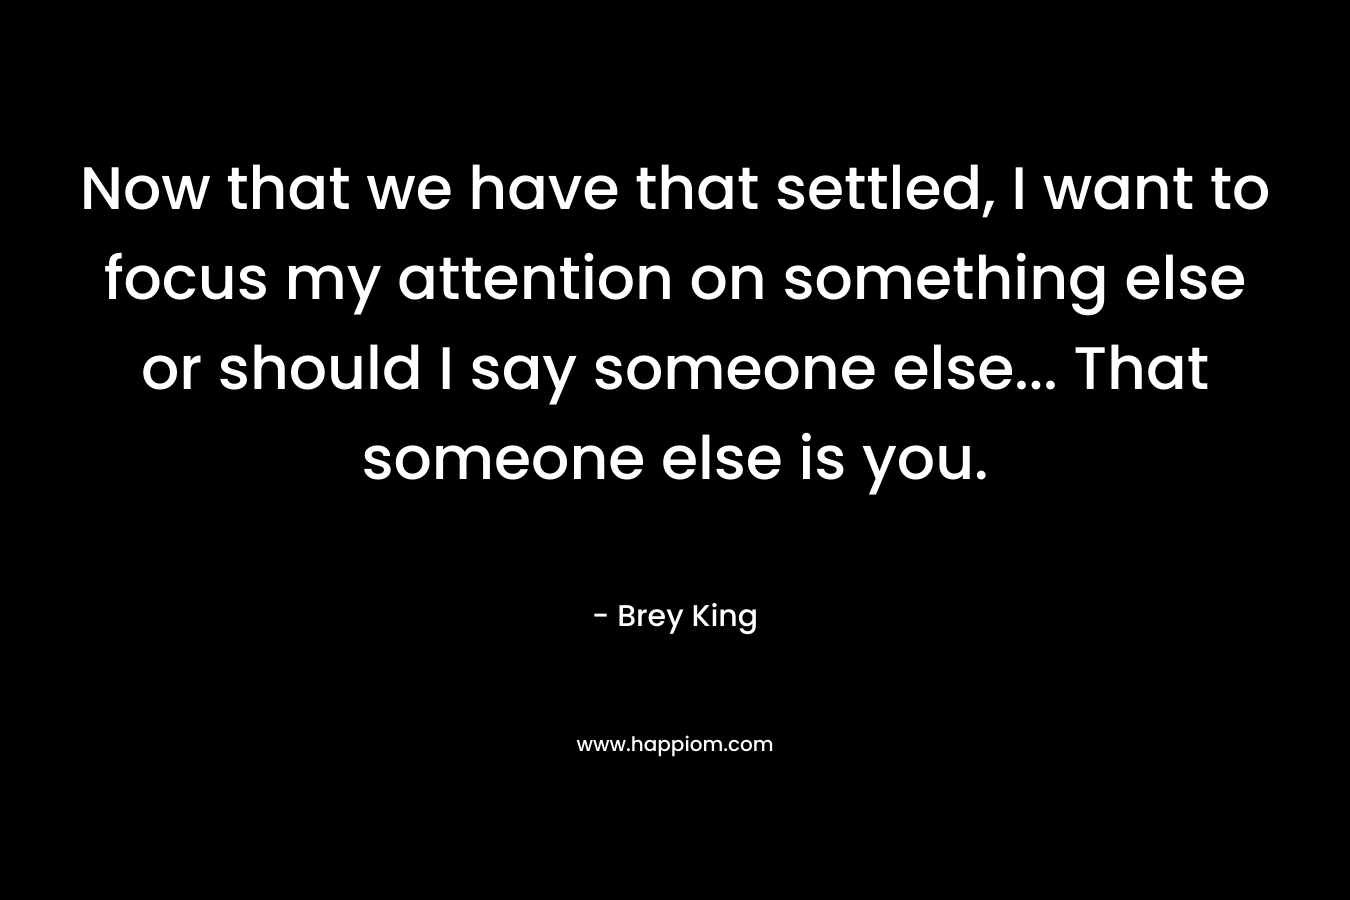 Now that we have that settled, I want to focus my attention on something else or should I say someone else… That someone else is you. – Brey King